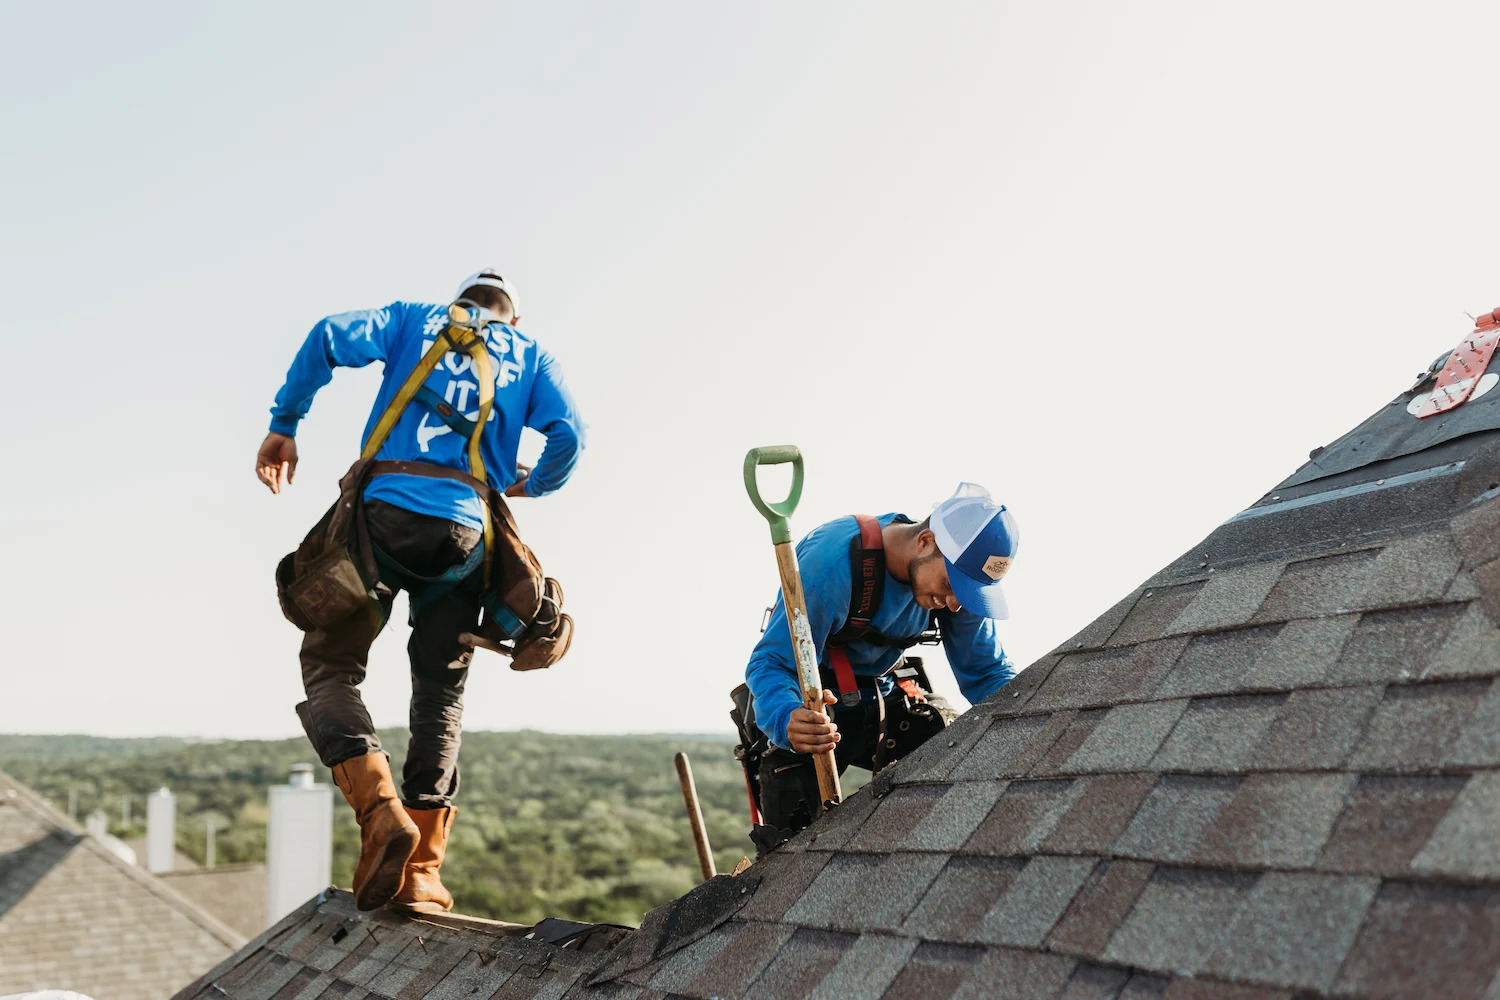 Bondoc Roofing's Commitment to Quality Shines Through in Their Roof Repair Expertise